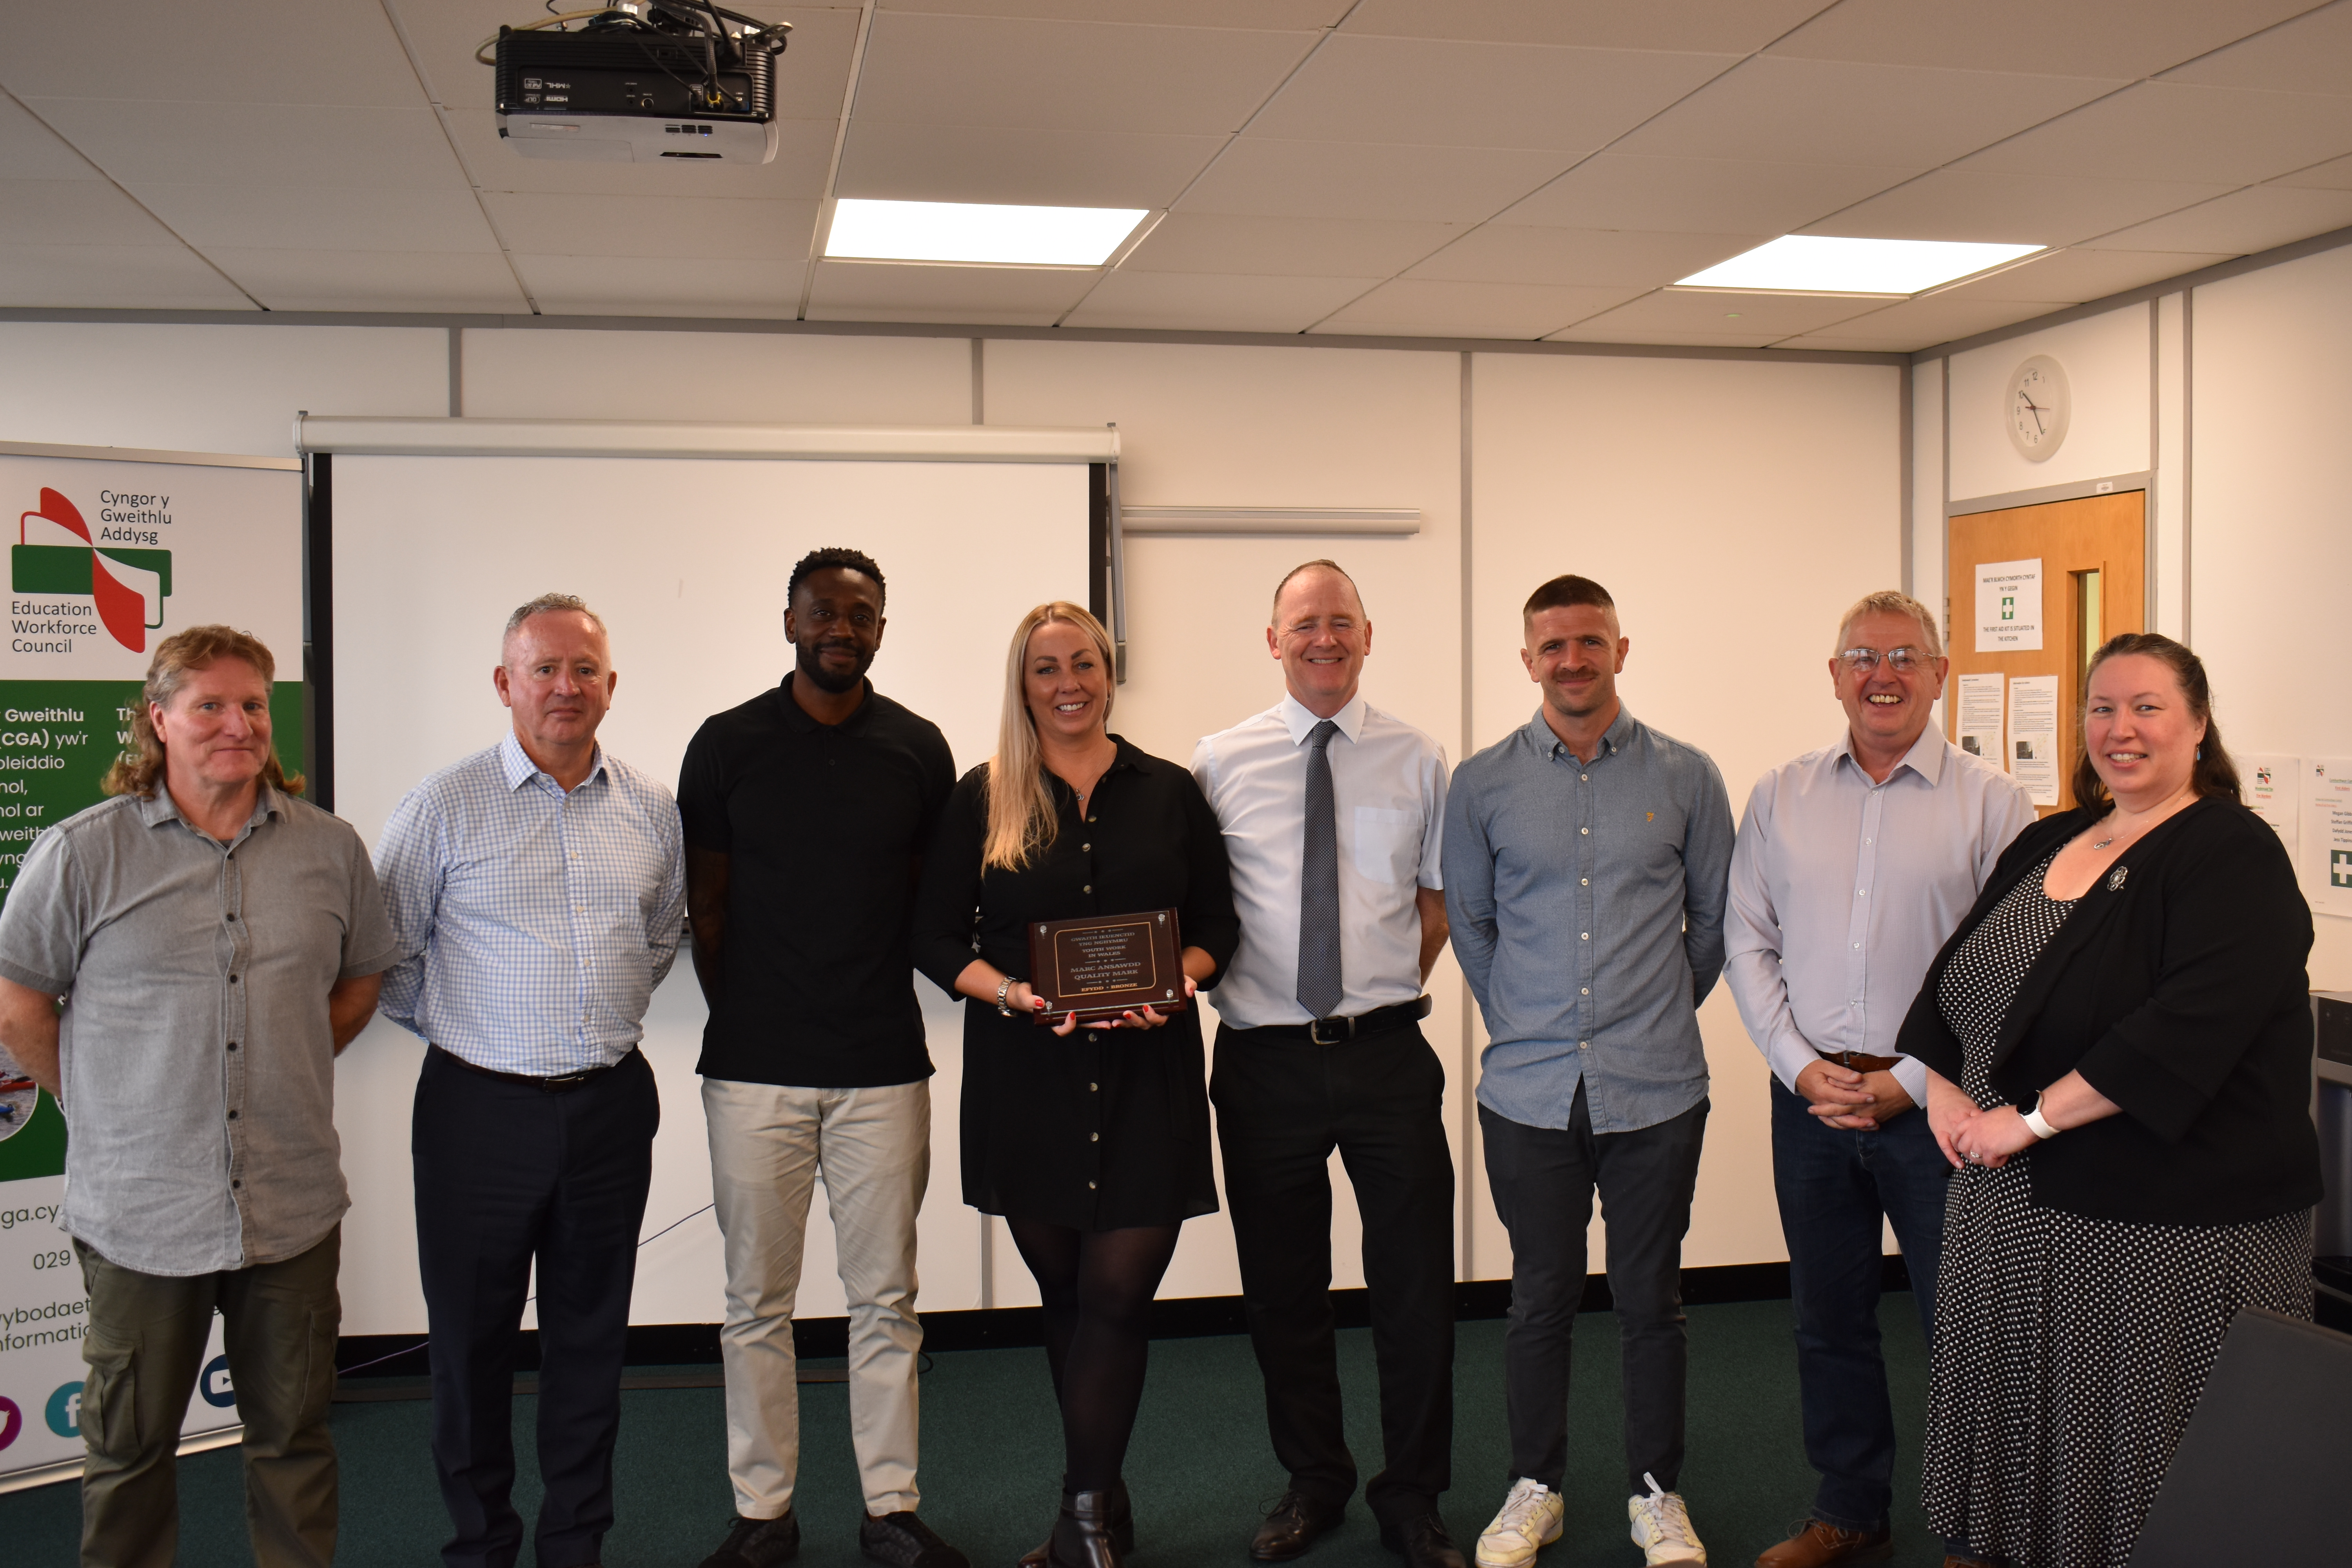 2.	Dewi Thomas (QMYW assessor), Ian Price, Jake Henry and Karen Henry (Vibe Youth), Hayden Llewellyn (EWC), Lewis Jones (Vibe Youth), Andy Borsden (EWC), Donna Robins (Welsh Government)